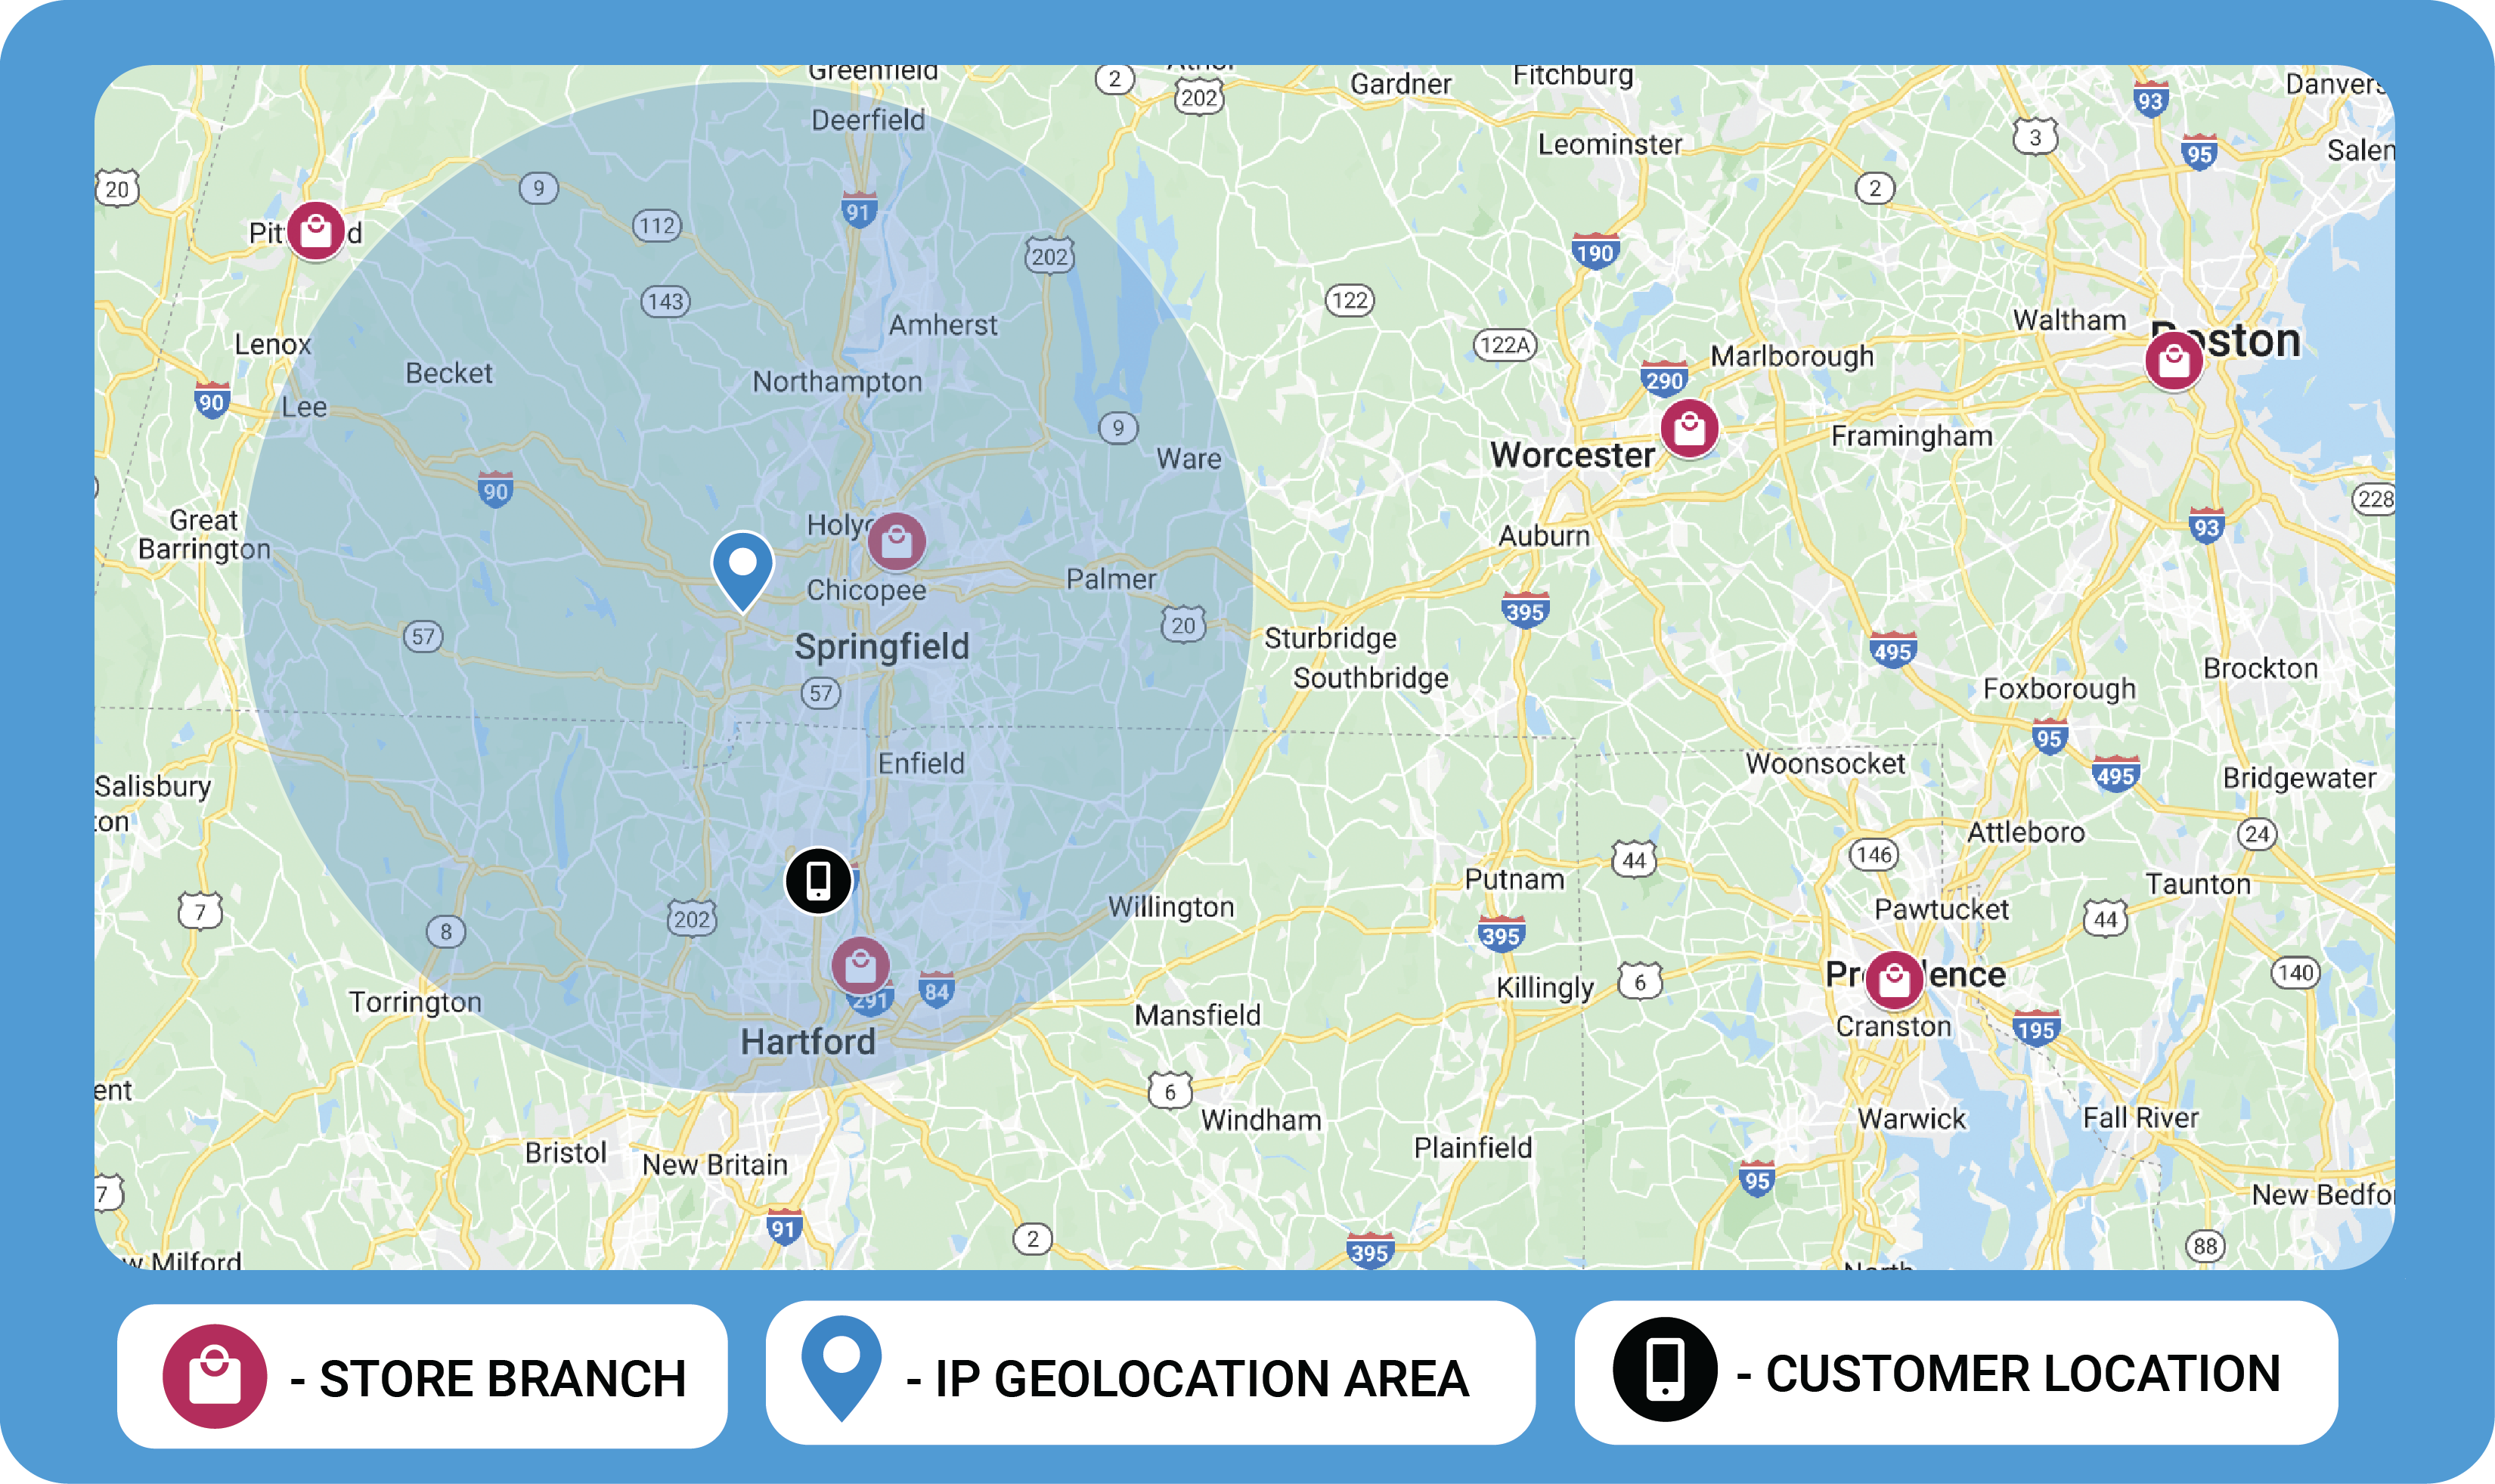 The same map as shown previously, with the store branches and IP geolocationarea marked. This time actual customer location is also marked. This time,however, the actual customer location is marked far to the south of the IPgeolocation point, but still within the IP geolocation area. The mark is nearHartford, one of the two stores enclosed in the IP geolocationarea.